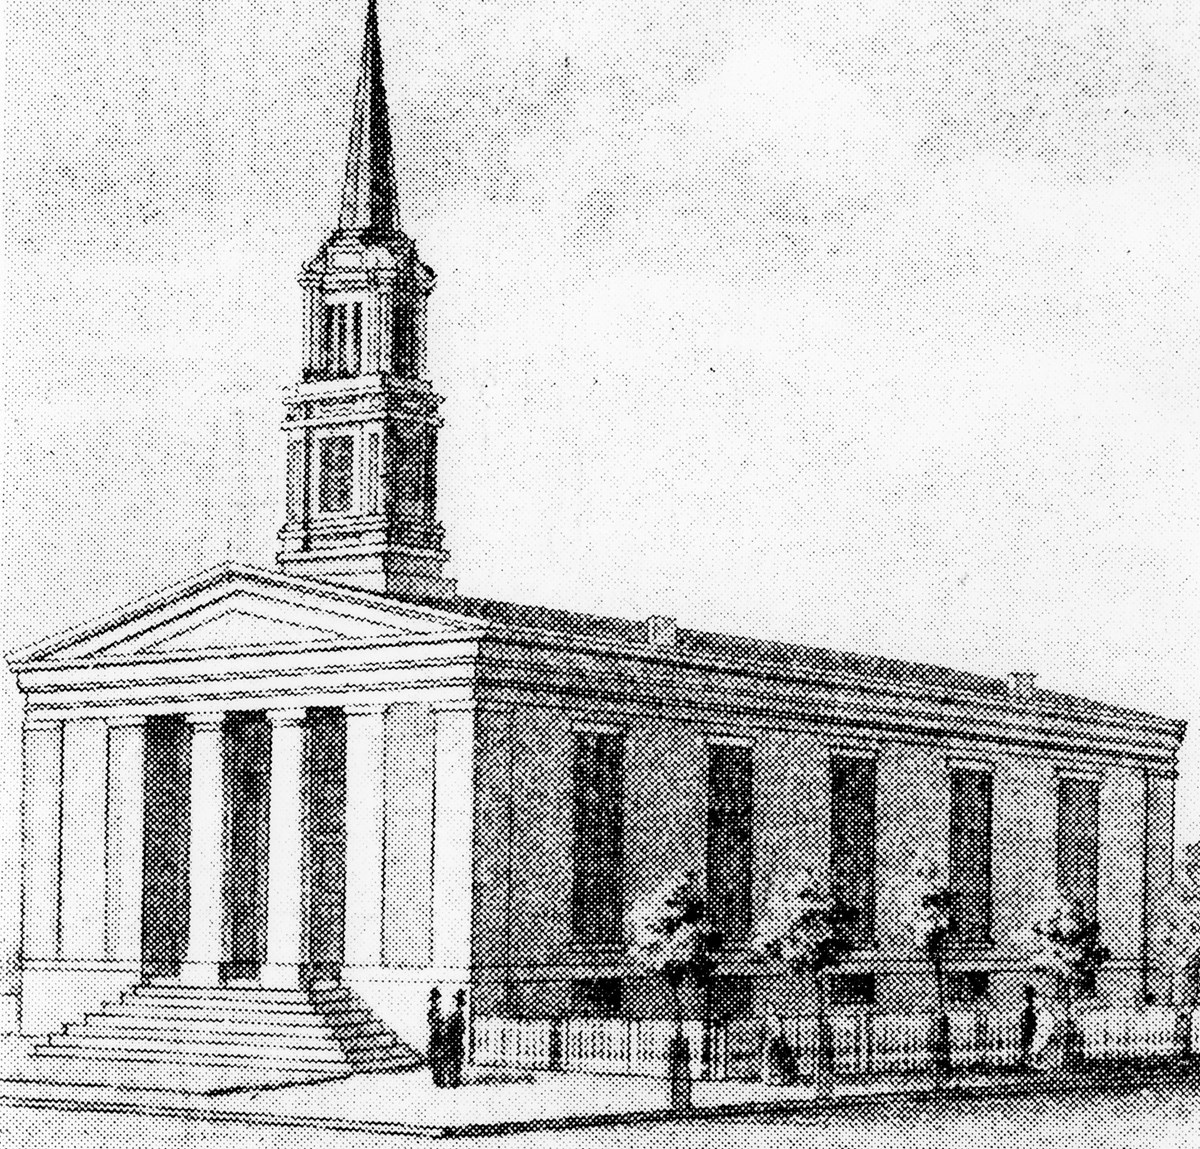 engraving of a long building with steps leading up to a pillared front entrance. A tower with a spire is located on the front roof.